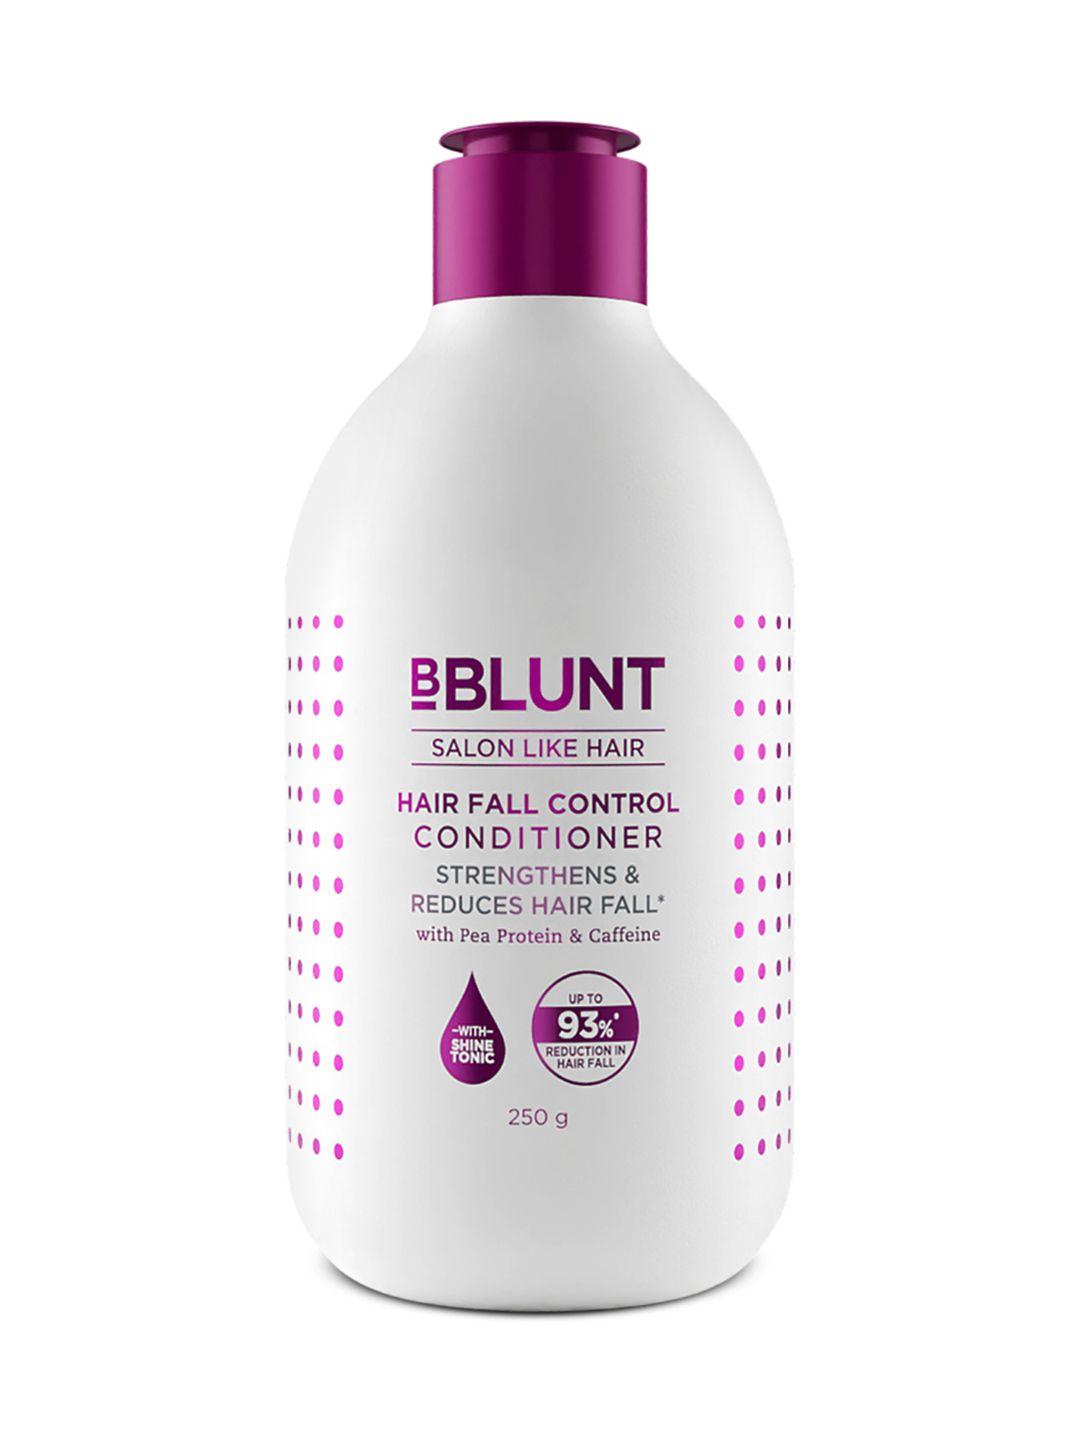 bblunt hair fall control conditioner with pea protein & caffeine for stronger hair - 250g